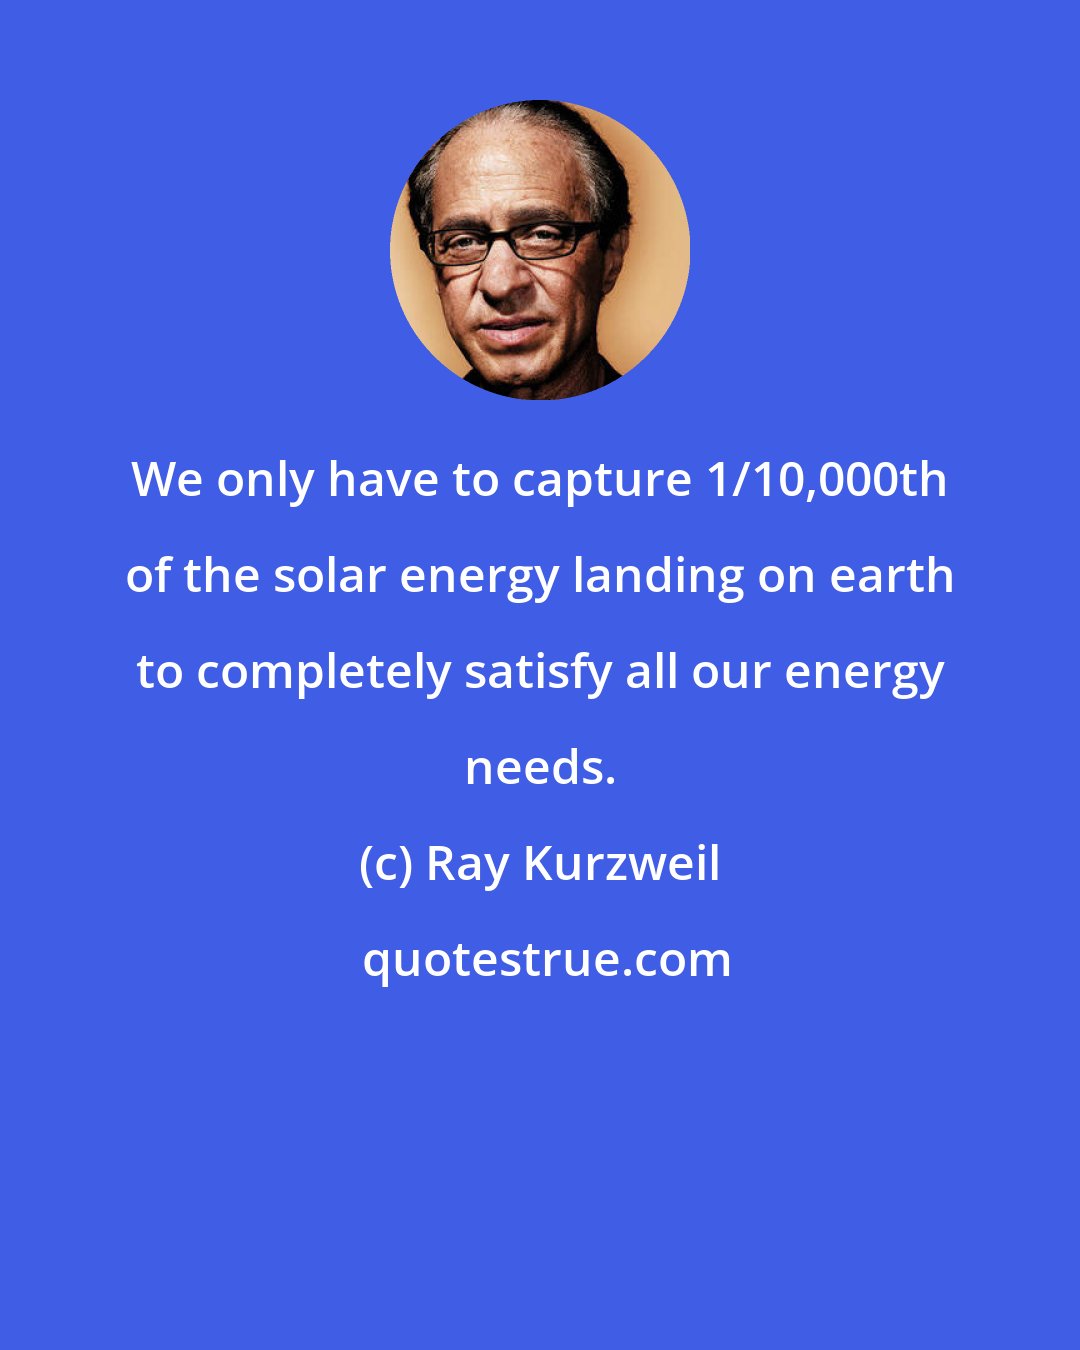 Ray Kurzweil: We only have to capture 1/10,000th of the solar energy landing on earth to completely satisfy all our energy needs.